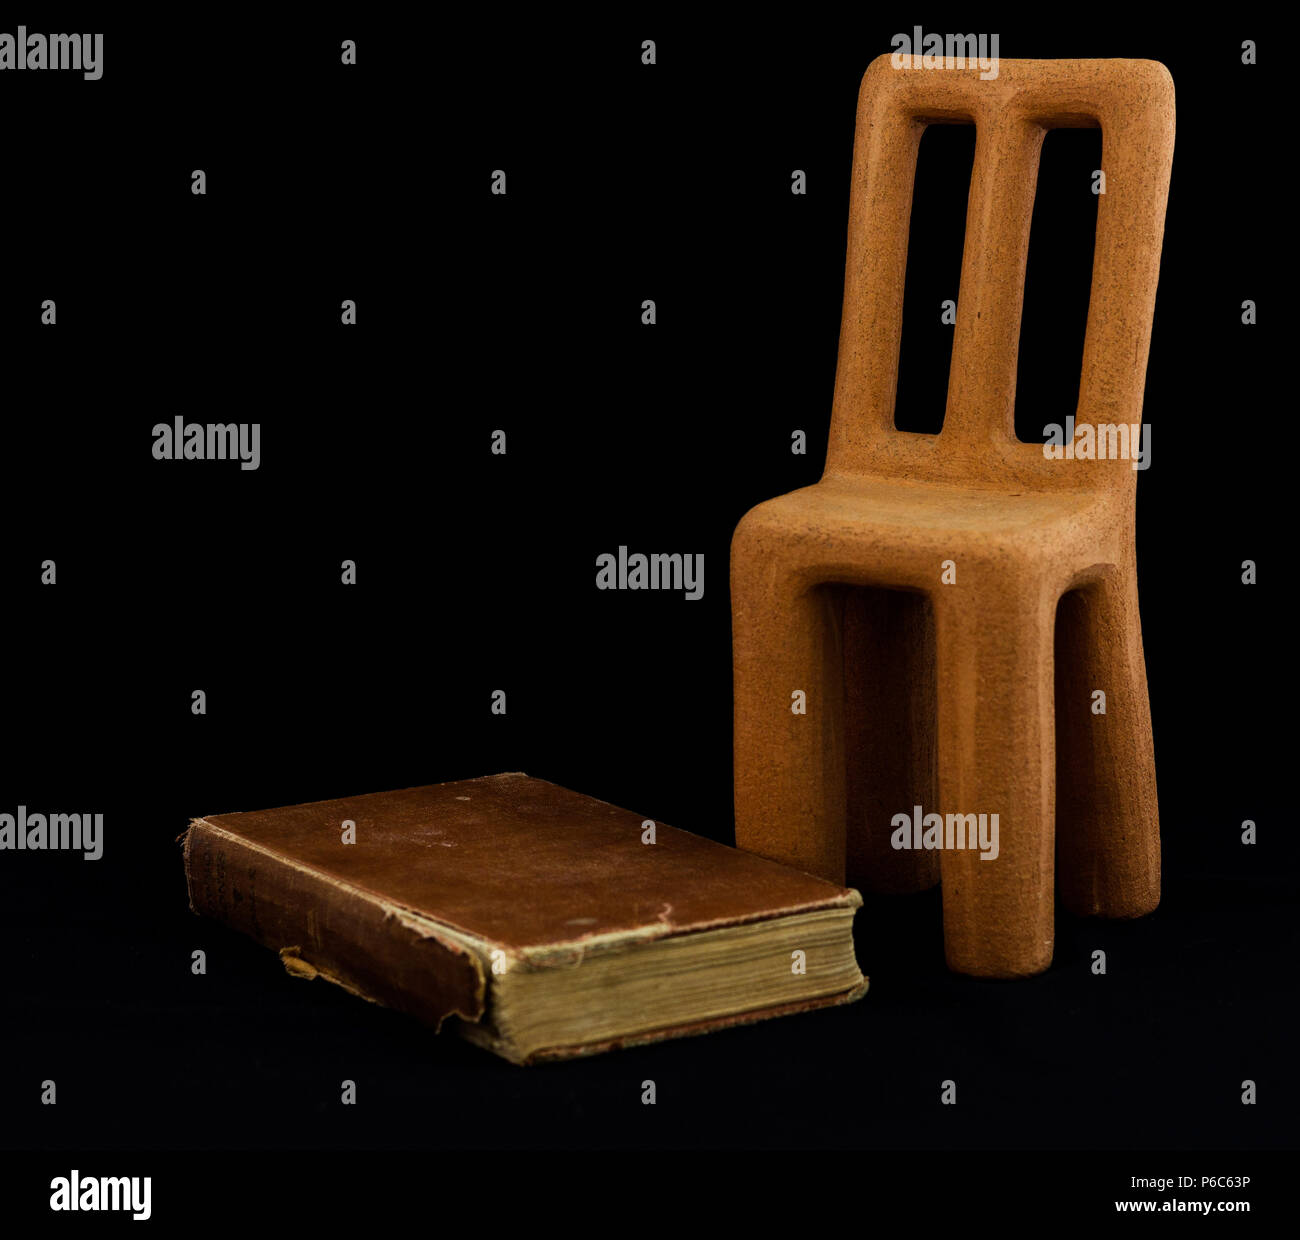 Clay chair, vintage book Stock Photo